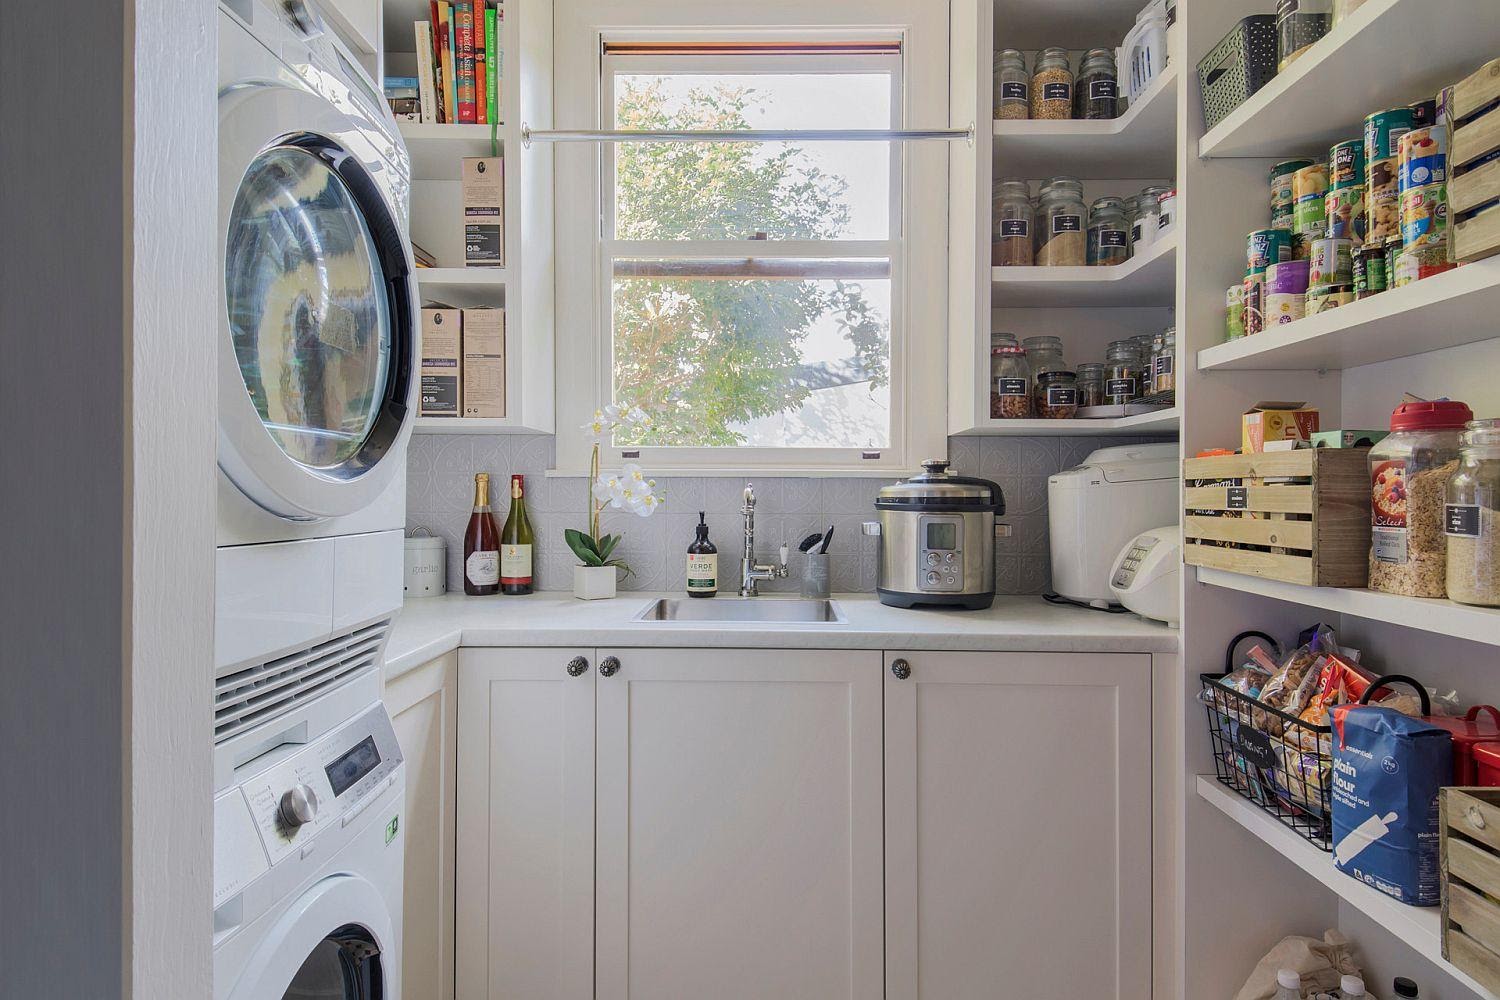 3. The Laundry Room and Pantry Combo by simphome.com